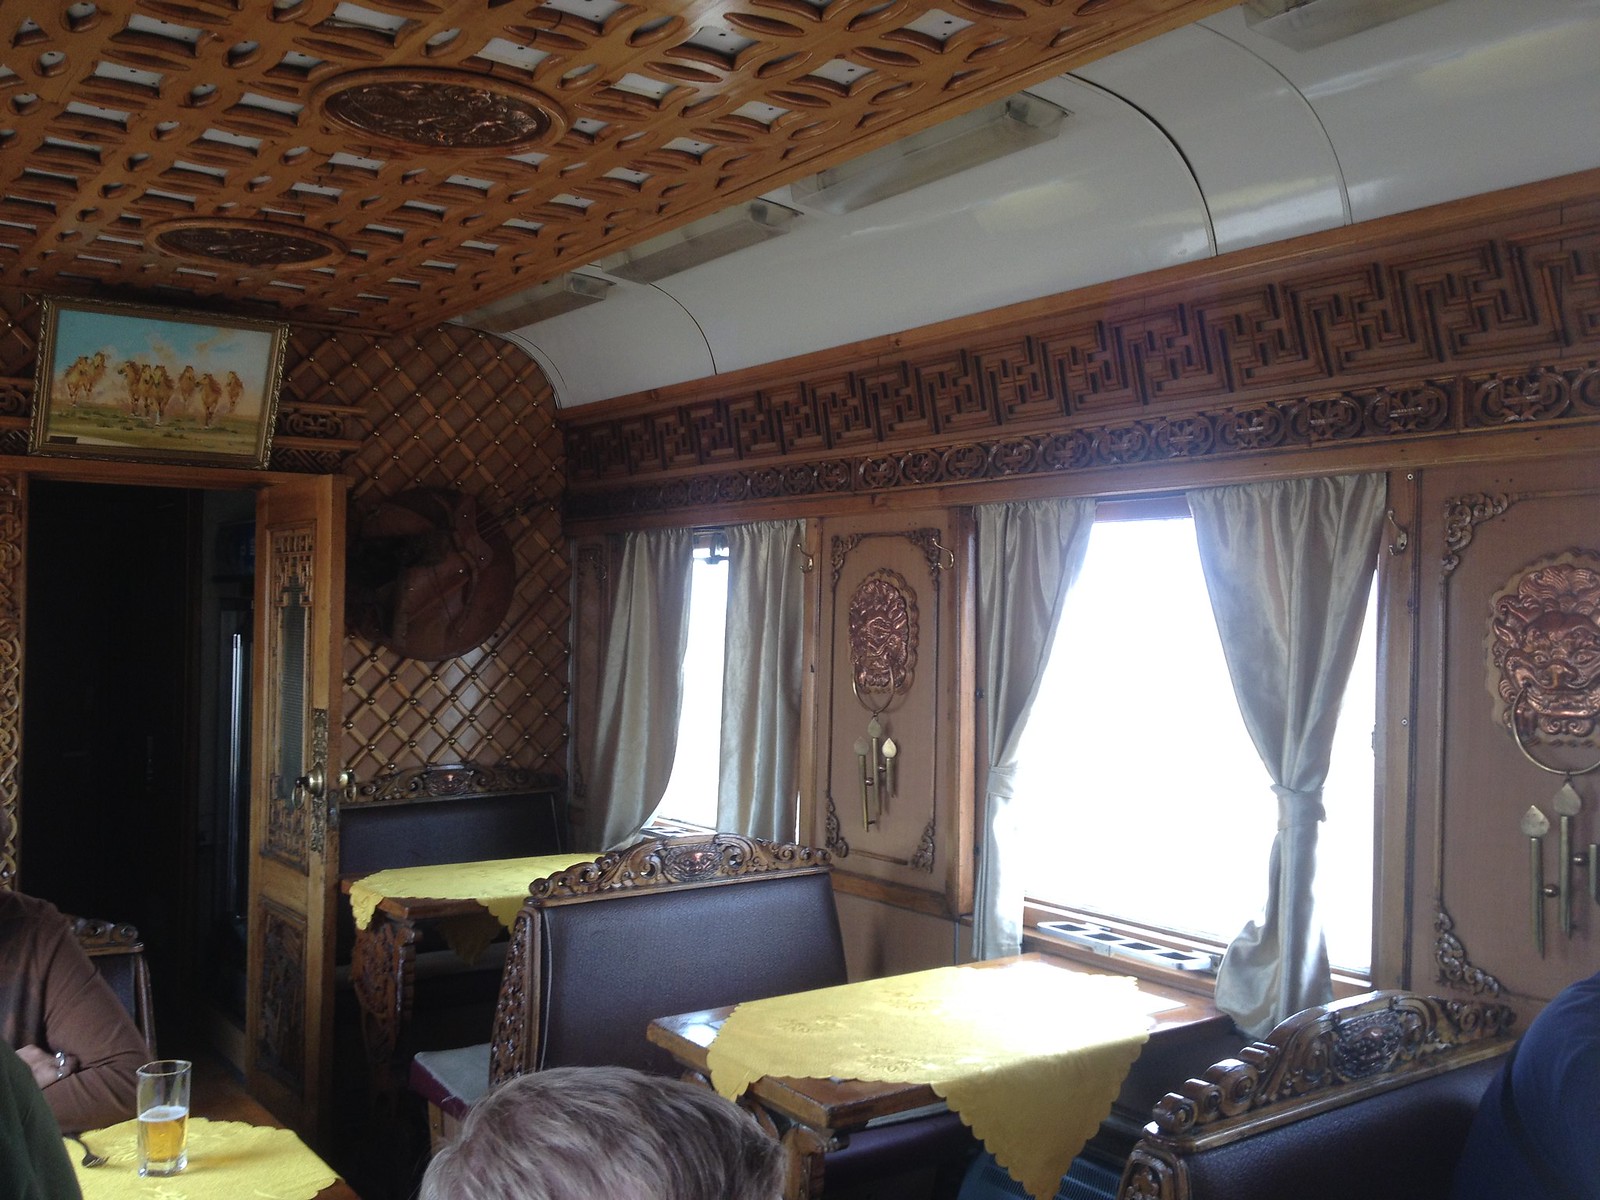 You could use your points to ride luxury trains like the Trans-Mongolian (dining card pictured here)